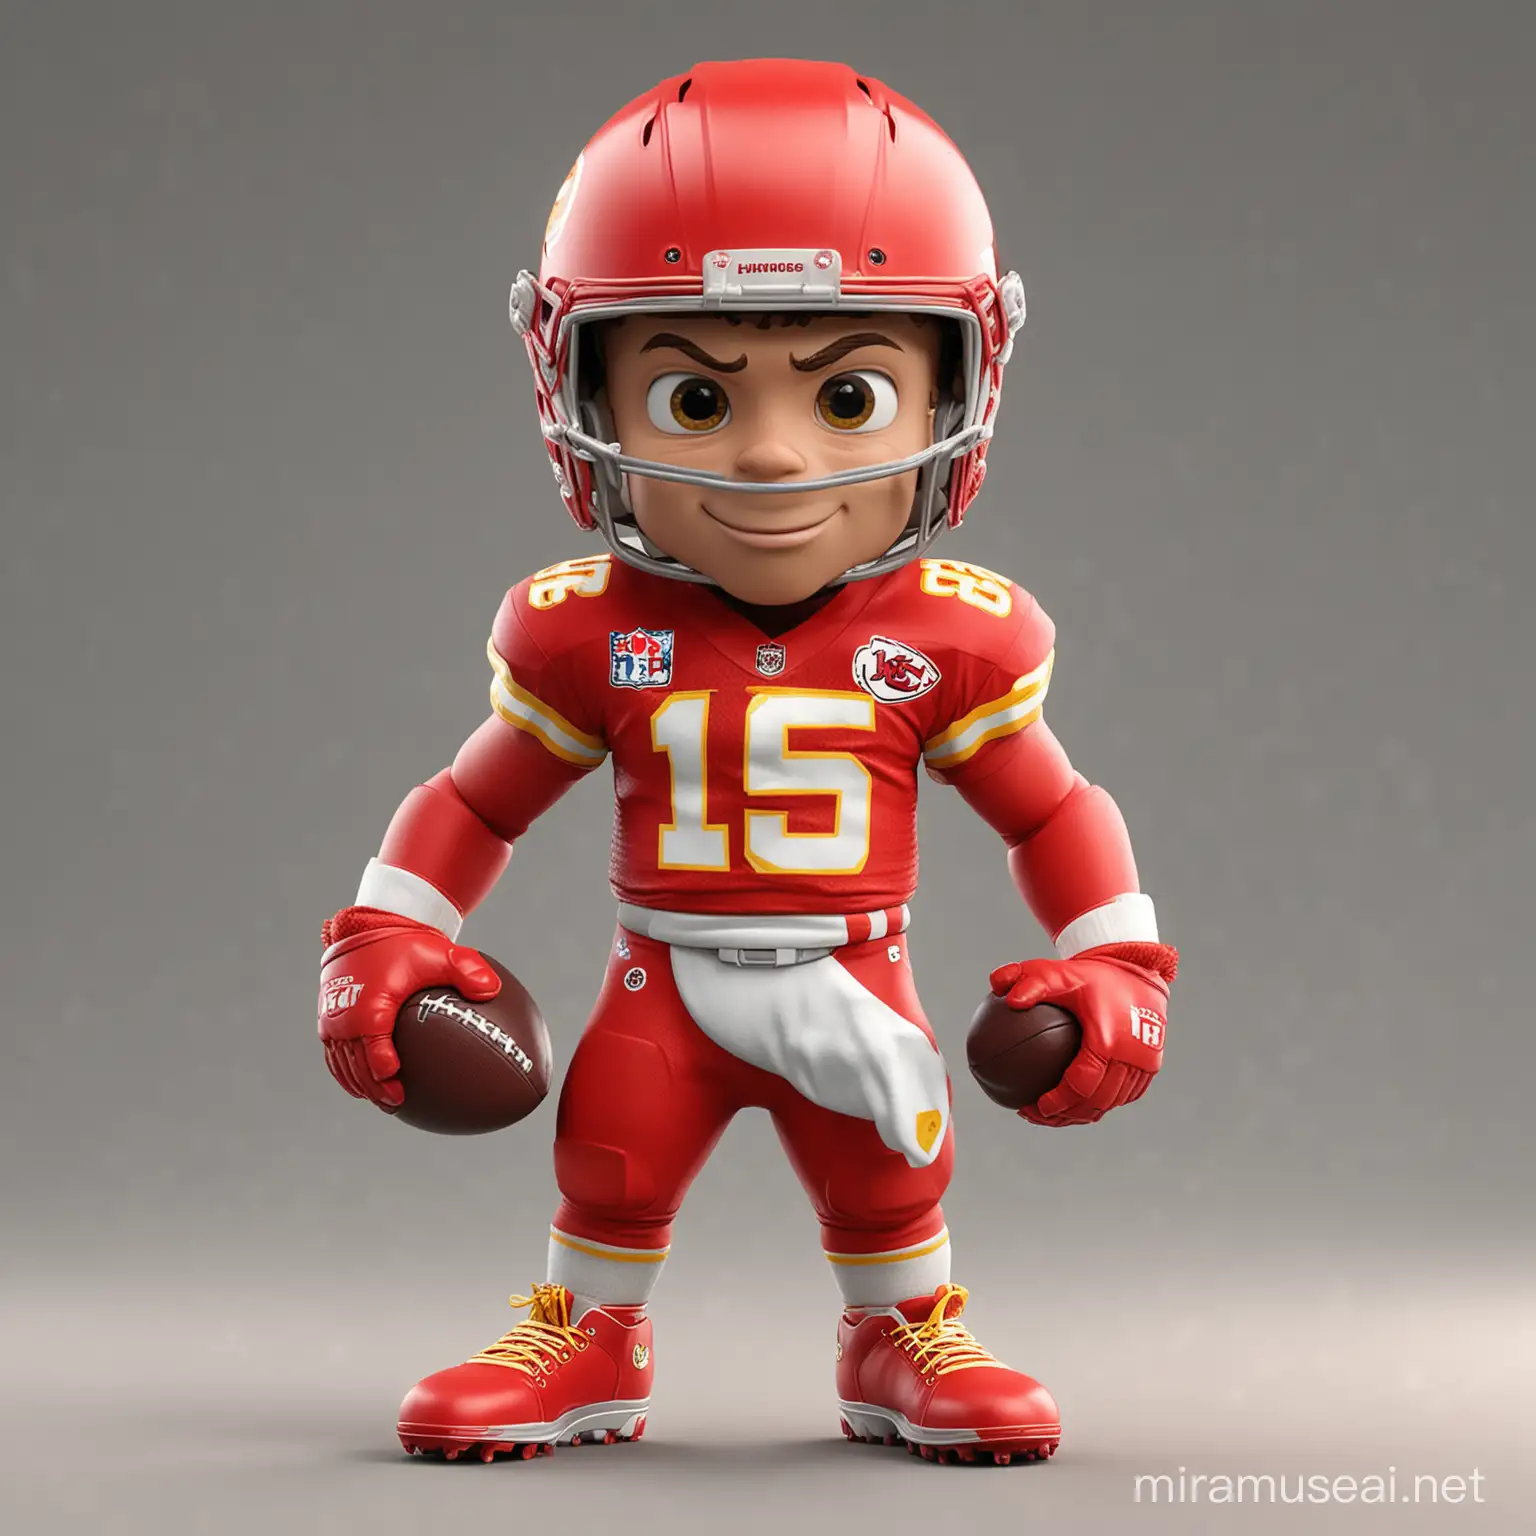 Adorable 3D Rendered NFL Player Patrick Mahomes LookAlike in Kansas City Chiefs Gear